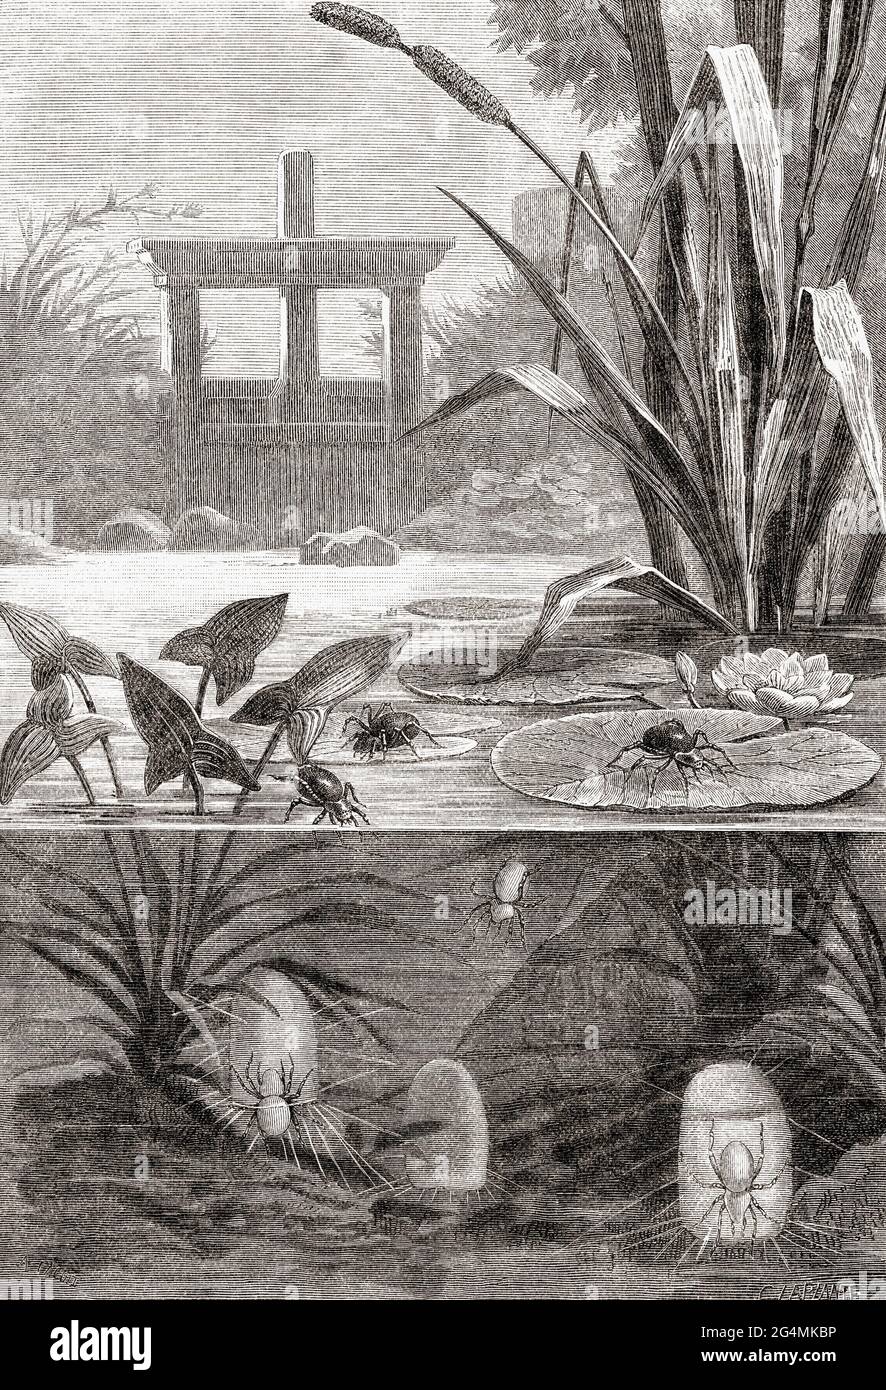 The diving bell spider or water spider (Argyroneta aquatica), top, and its diving bell, bottom. This is the only species of spider known to live nearly all the time underwater. From The Universe or, The Infinitely Great and the Infinitely Little, published 1882. Stock Photo